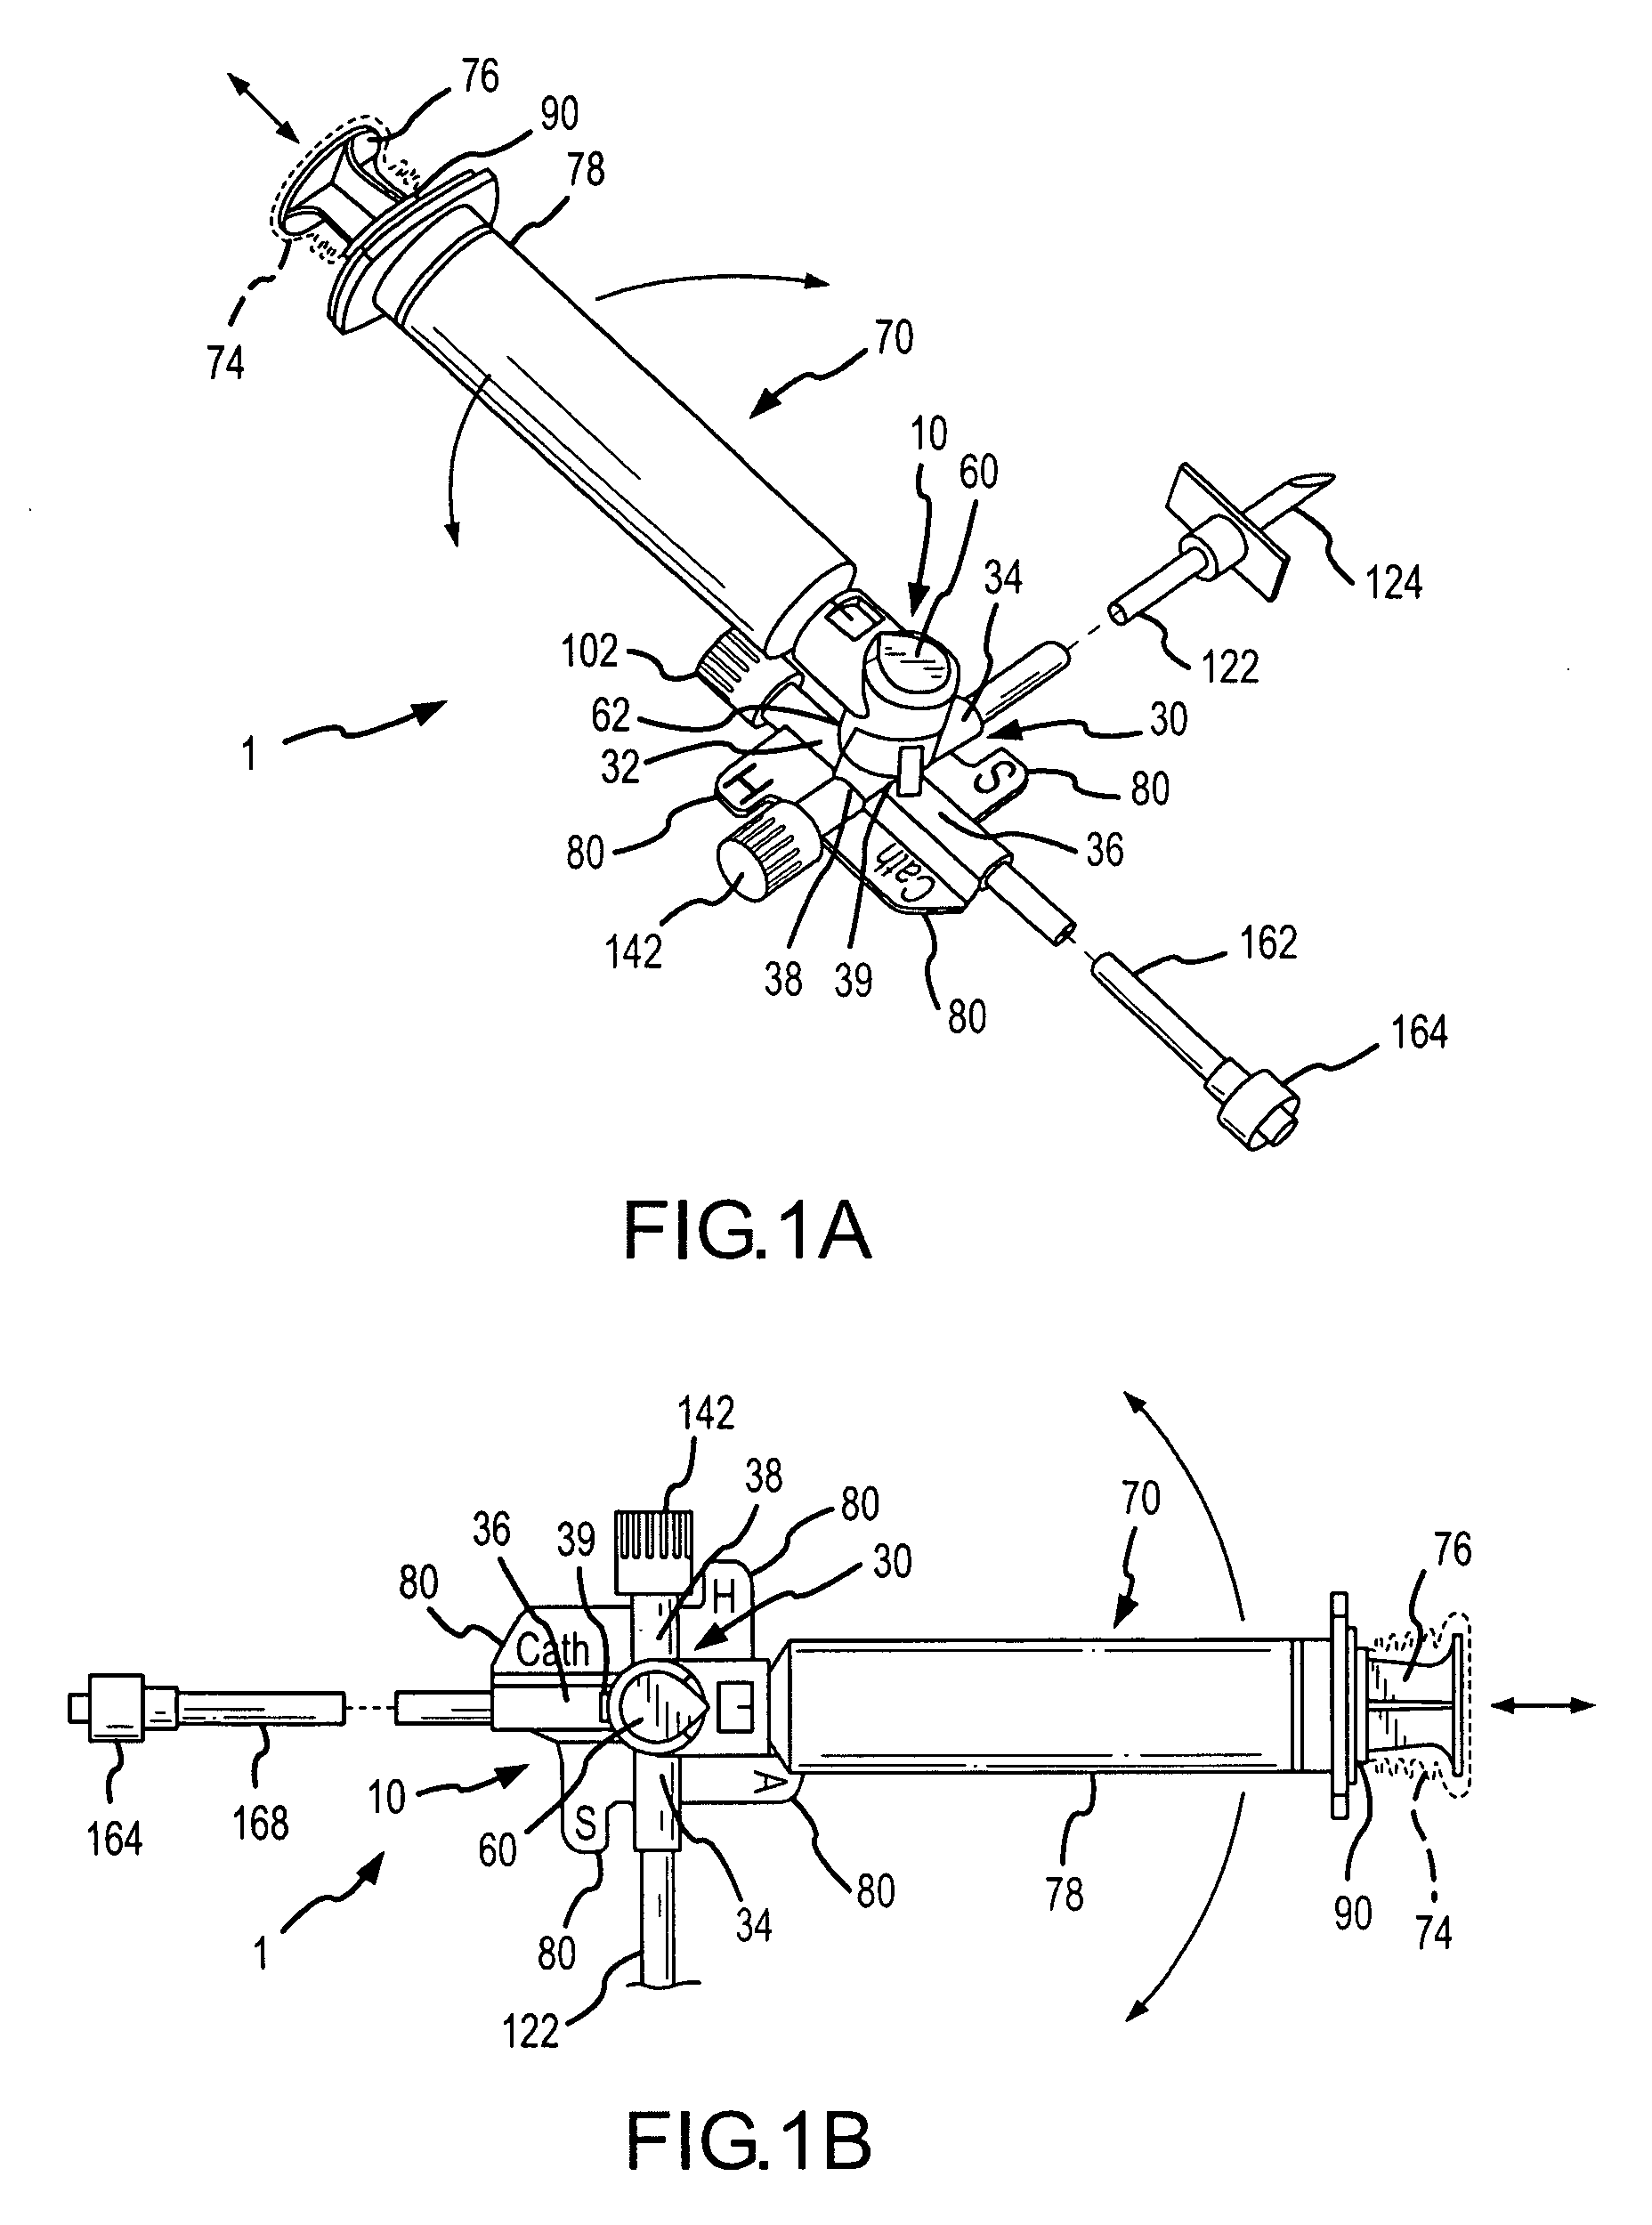 Apparatus and method for administration of IV liquid medication and IV flush solutions